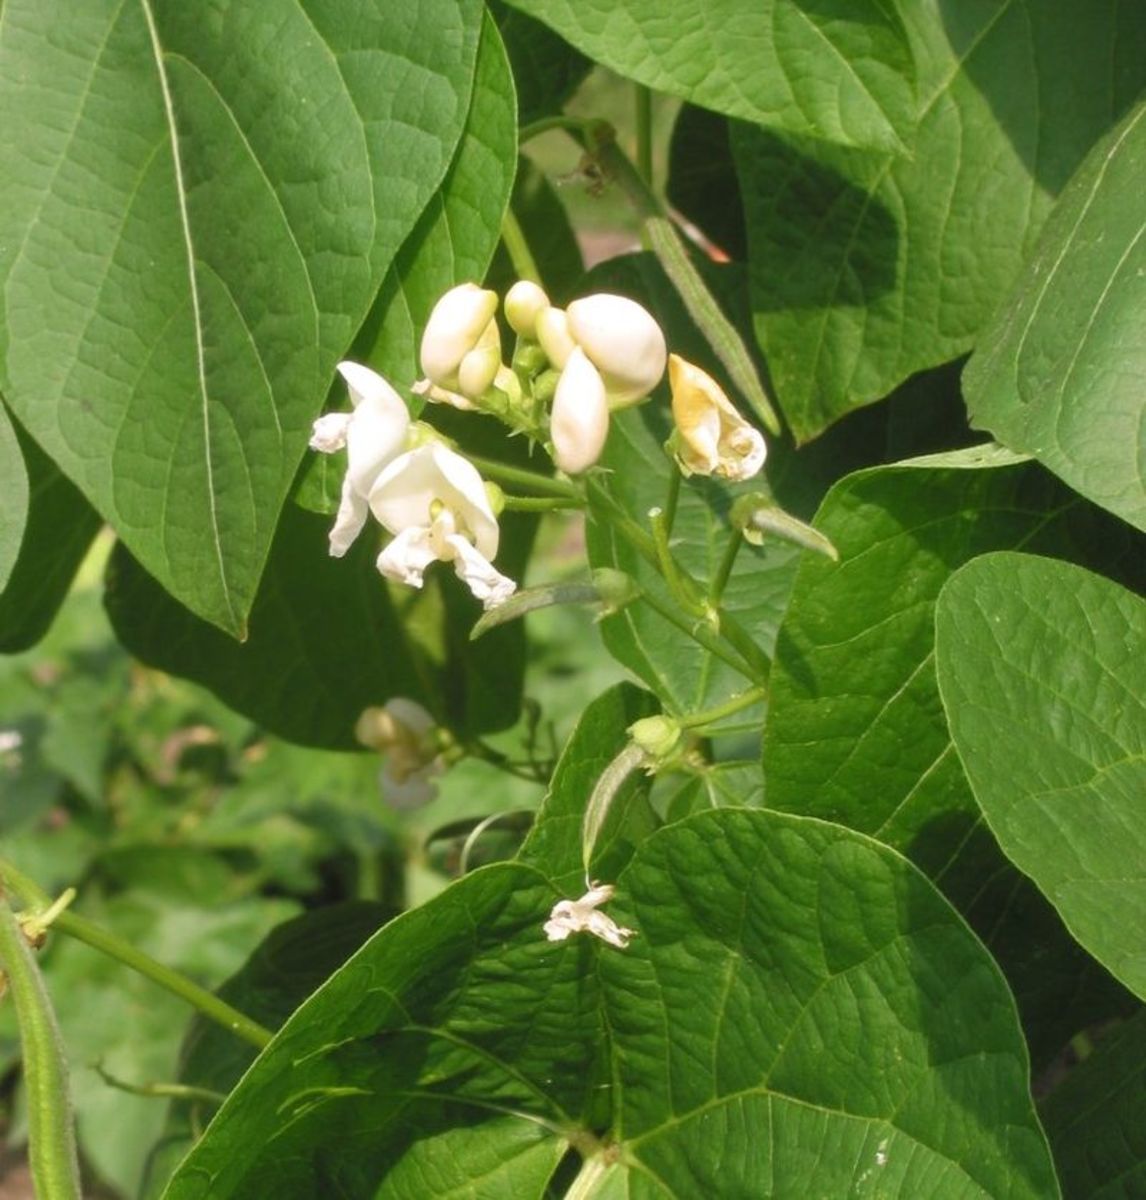 The flowers can also be white.